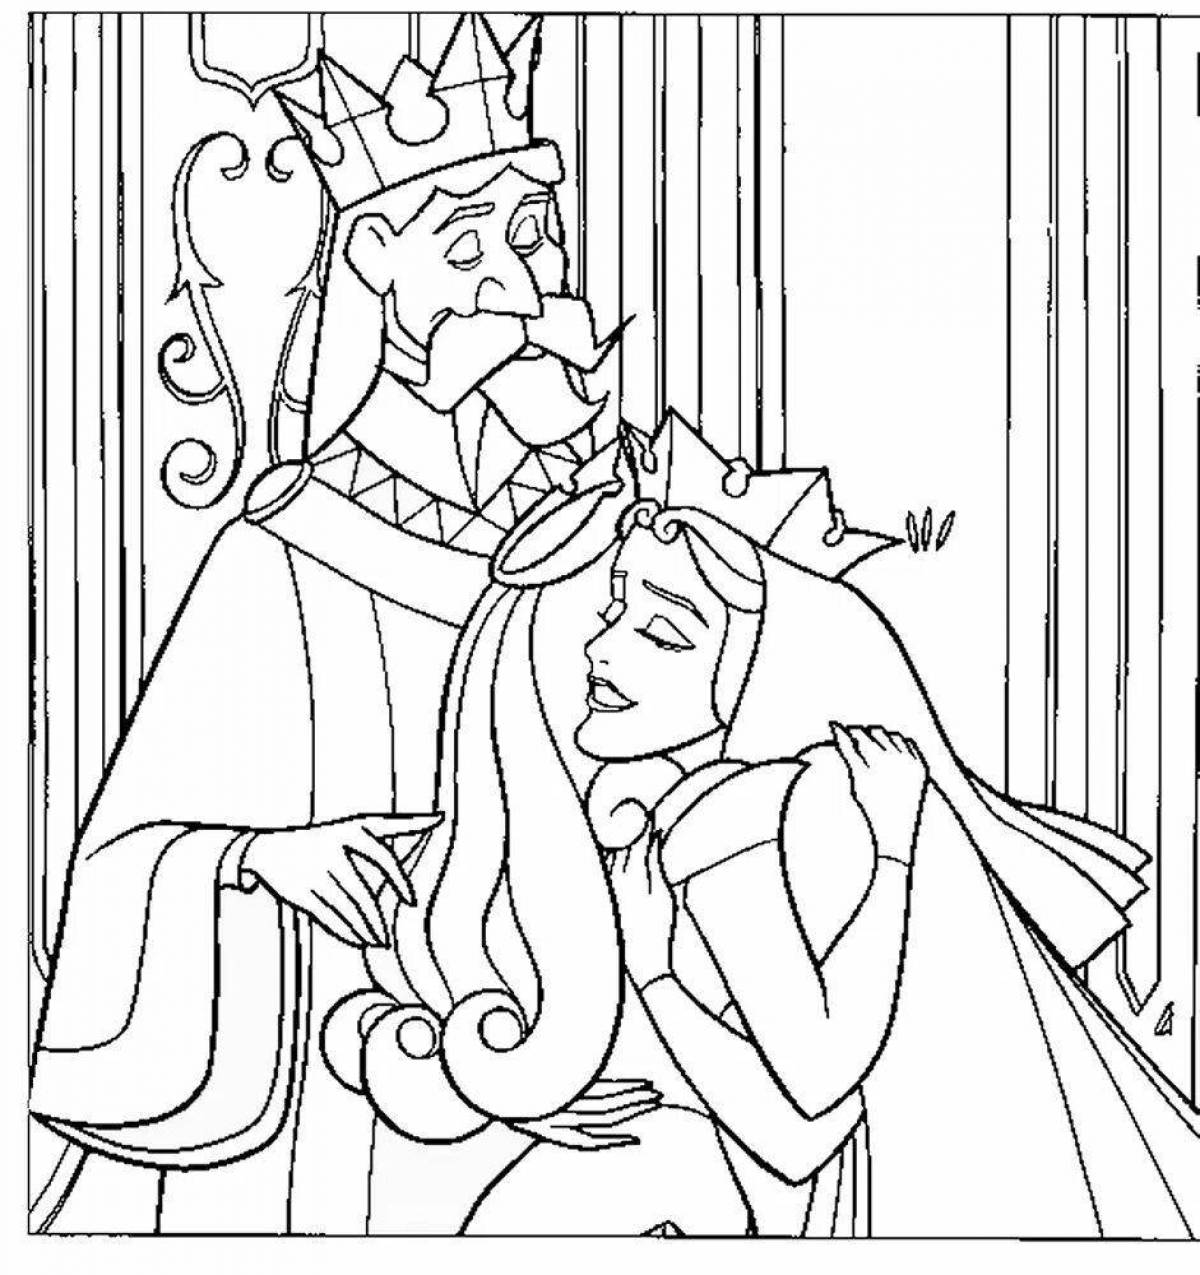 Exotic sleeping beauty coloring book for kids